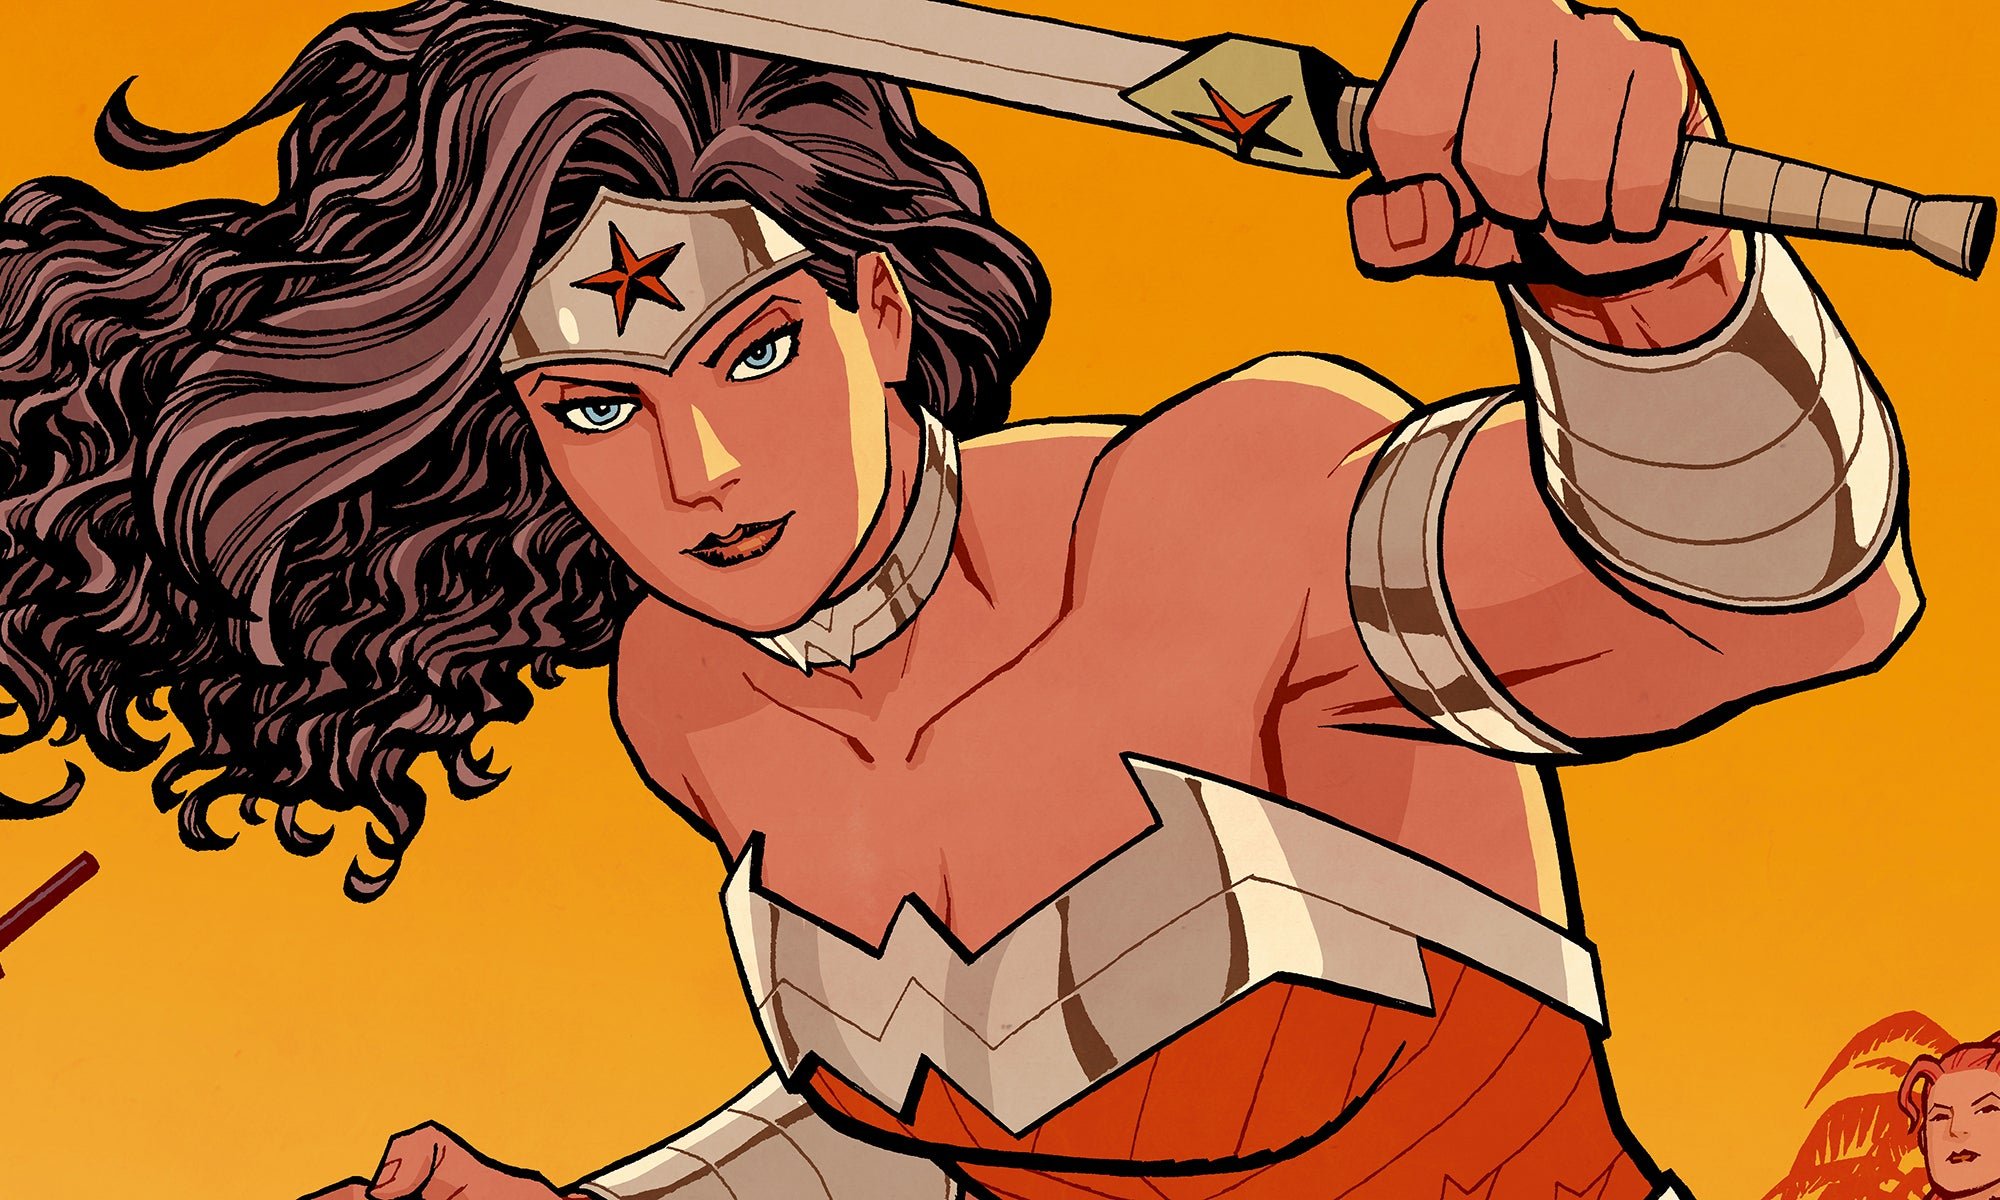 Wonder Woman: Blood and Guts: The Deluxe Edition